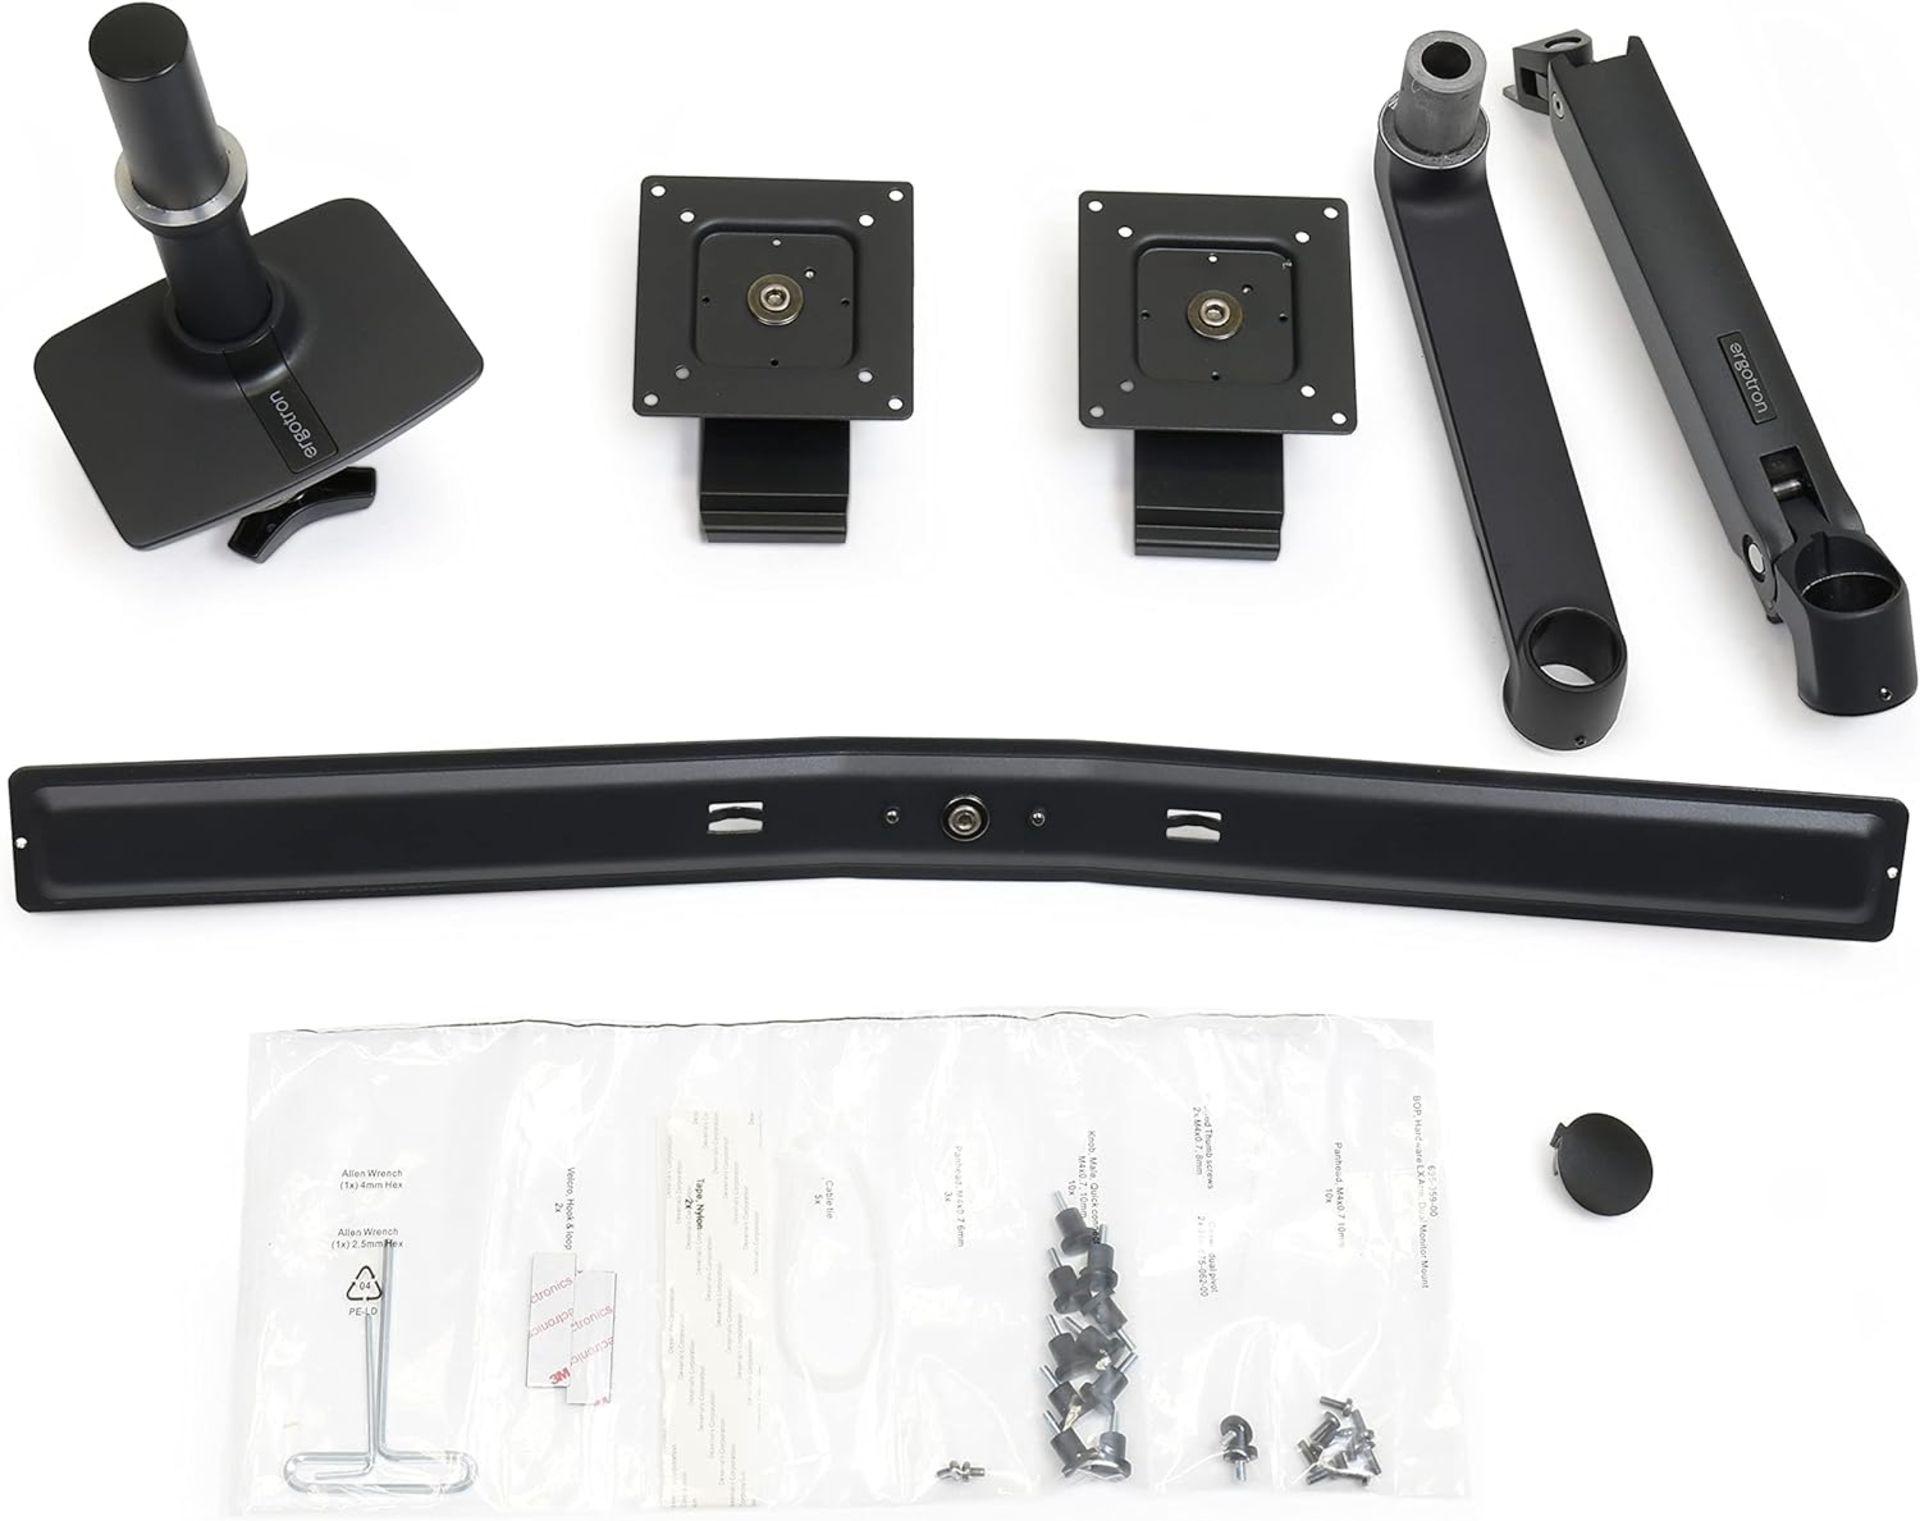 NEW & BOXED ERGOTRON LX - Mounting kit (articulating arm, 2 pivots, dual displays bow, base, 2-piece - Image 8 of 8